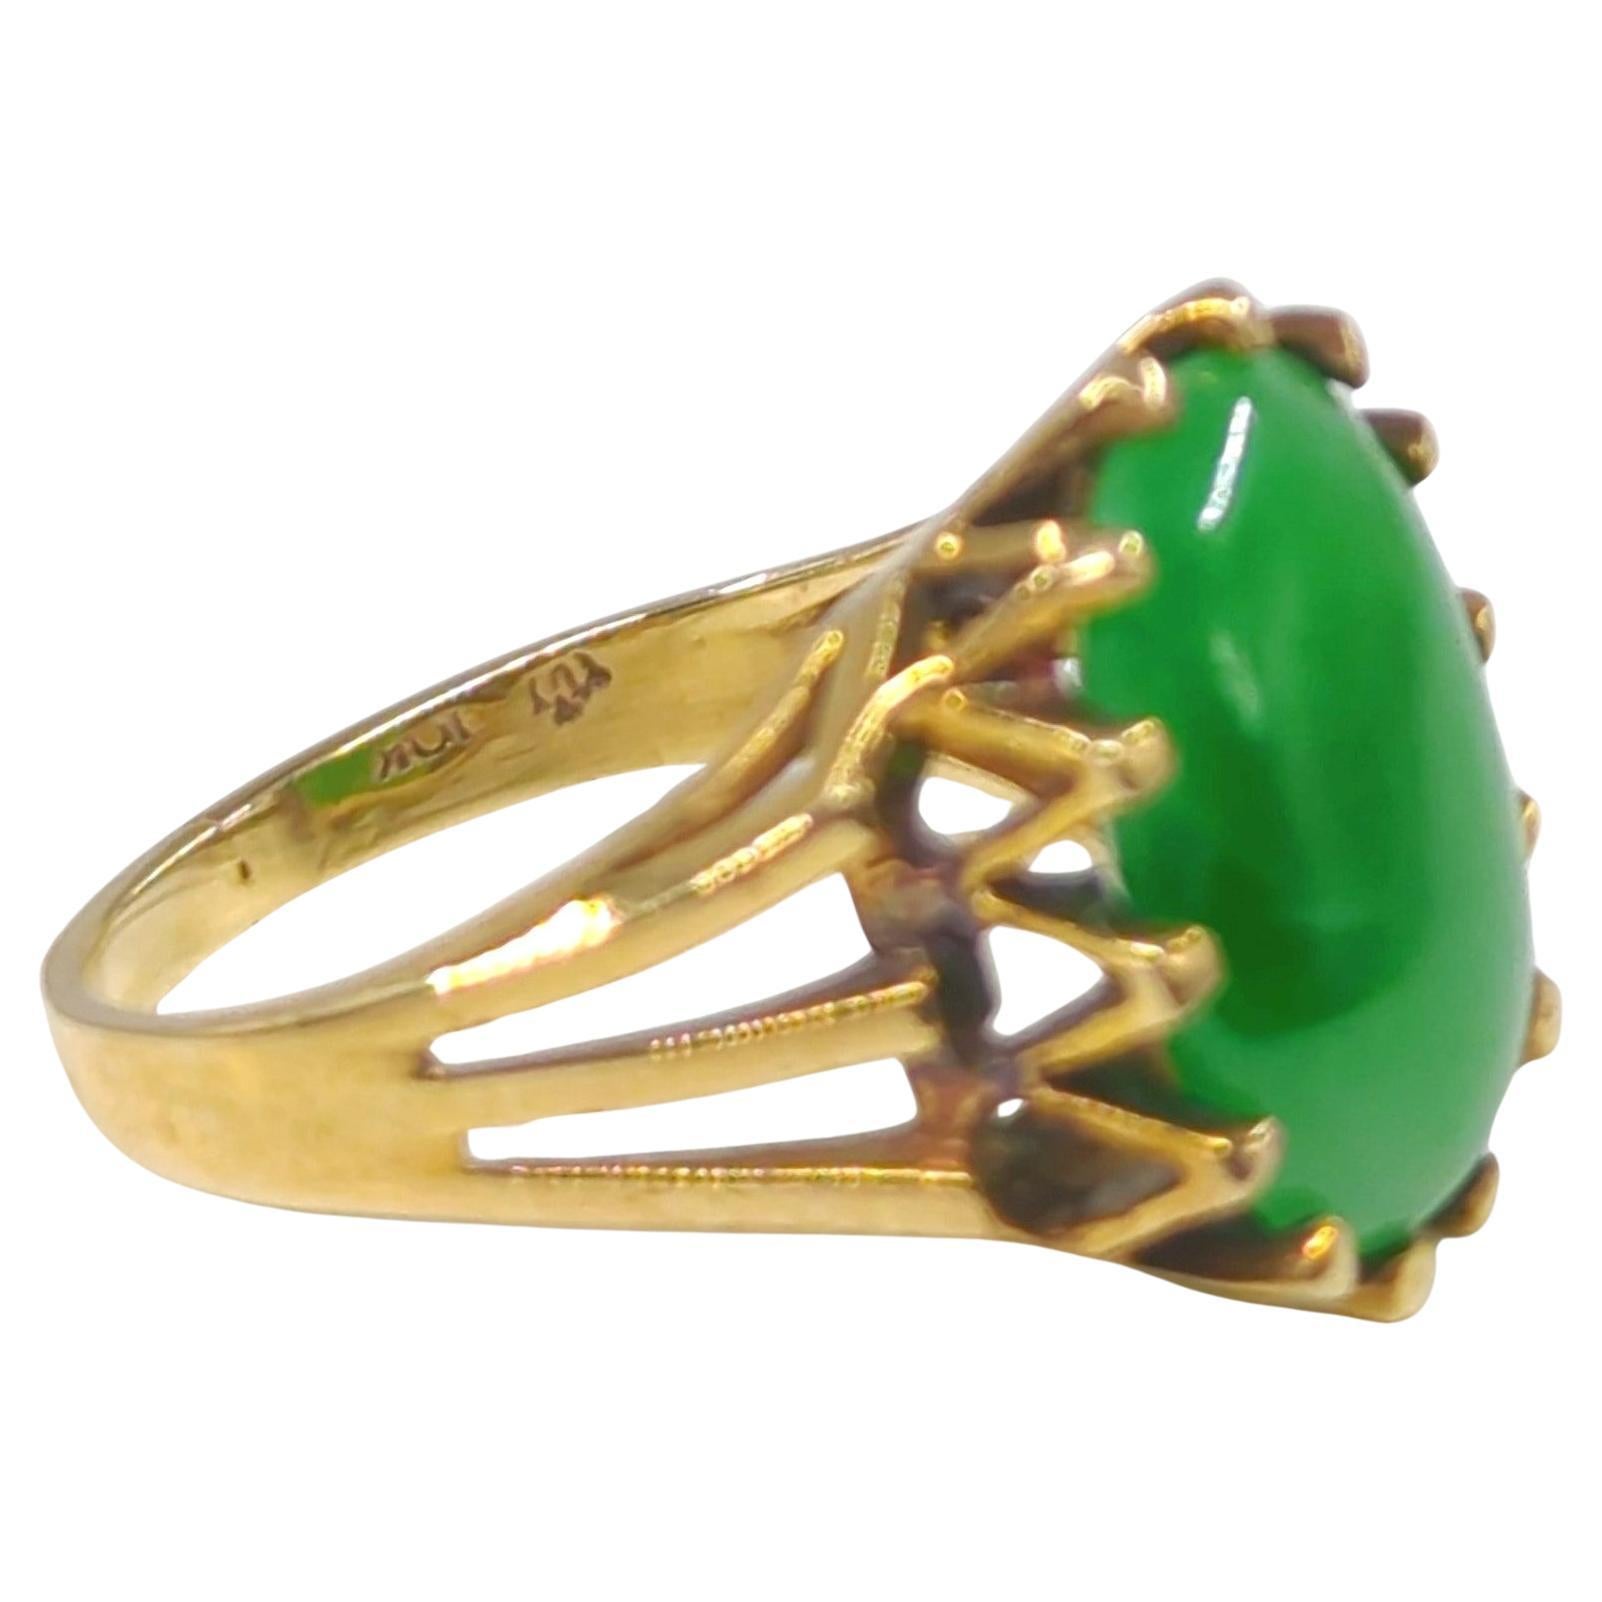 Vintage 10K Yellow Gold Intense Apple Green Natural Jadeite Ring A-Grade Size 6 For Sale 1